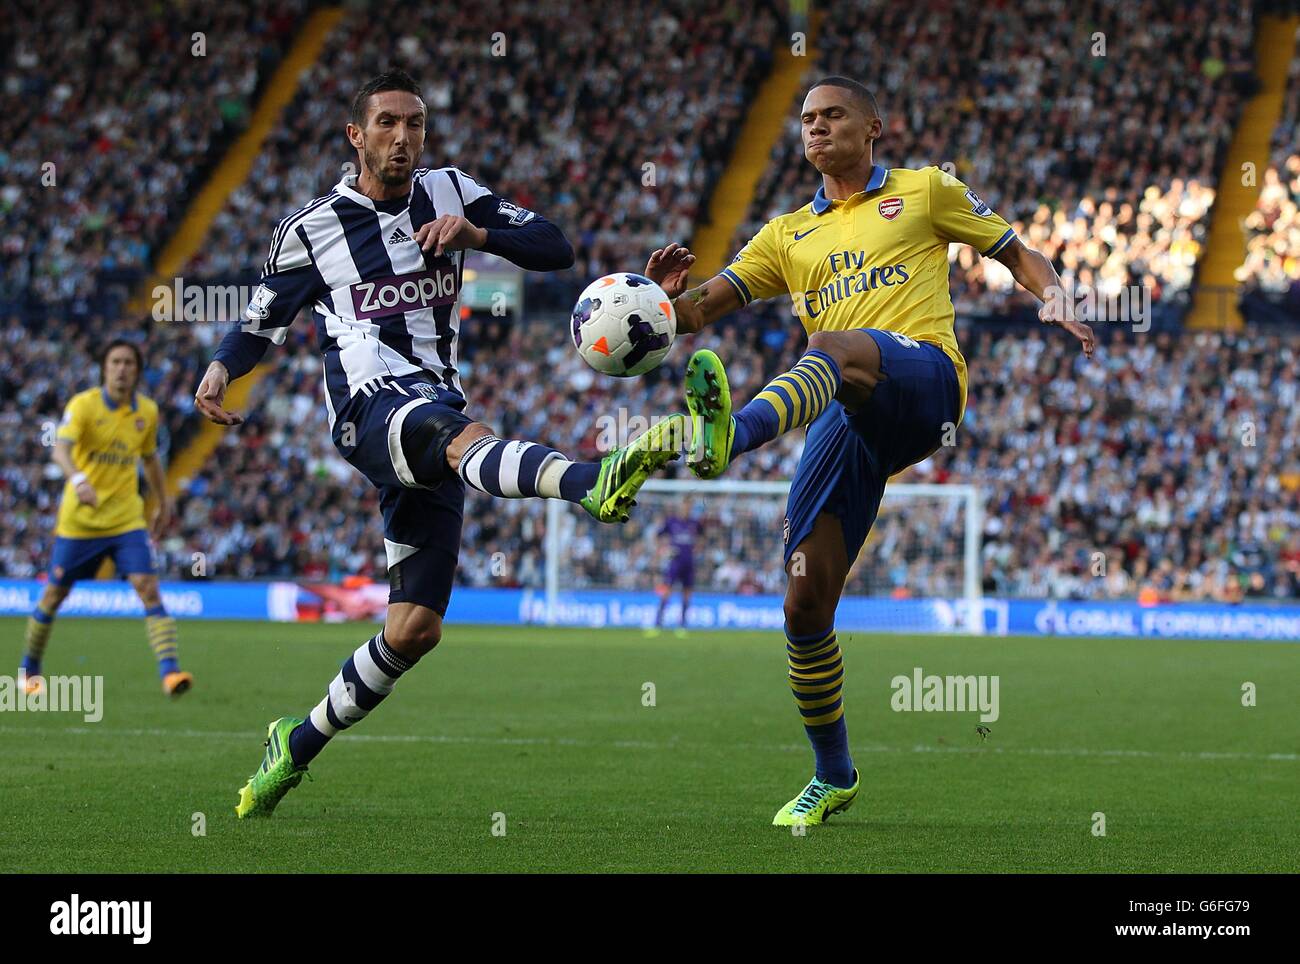 Soccer - Barclays Premier League - West Bromwich Albion v Arsenal - The Hawthorns. Arsenal's Kieran Gibbs (right) and West Bromwich Albion's Morgan Amalfitano battle for the ball Stock Photo